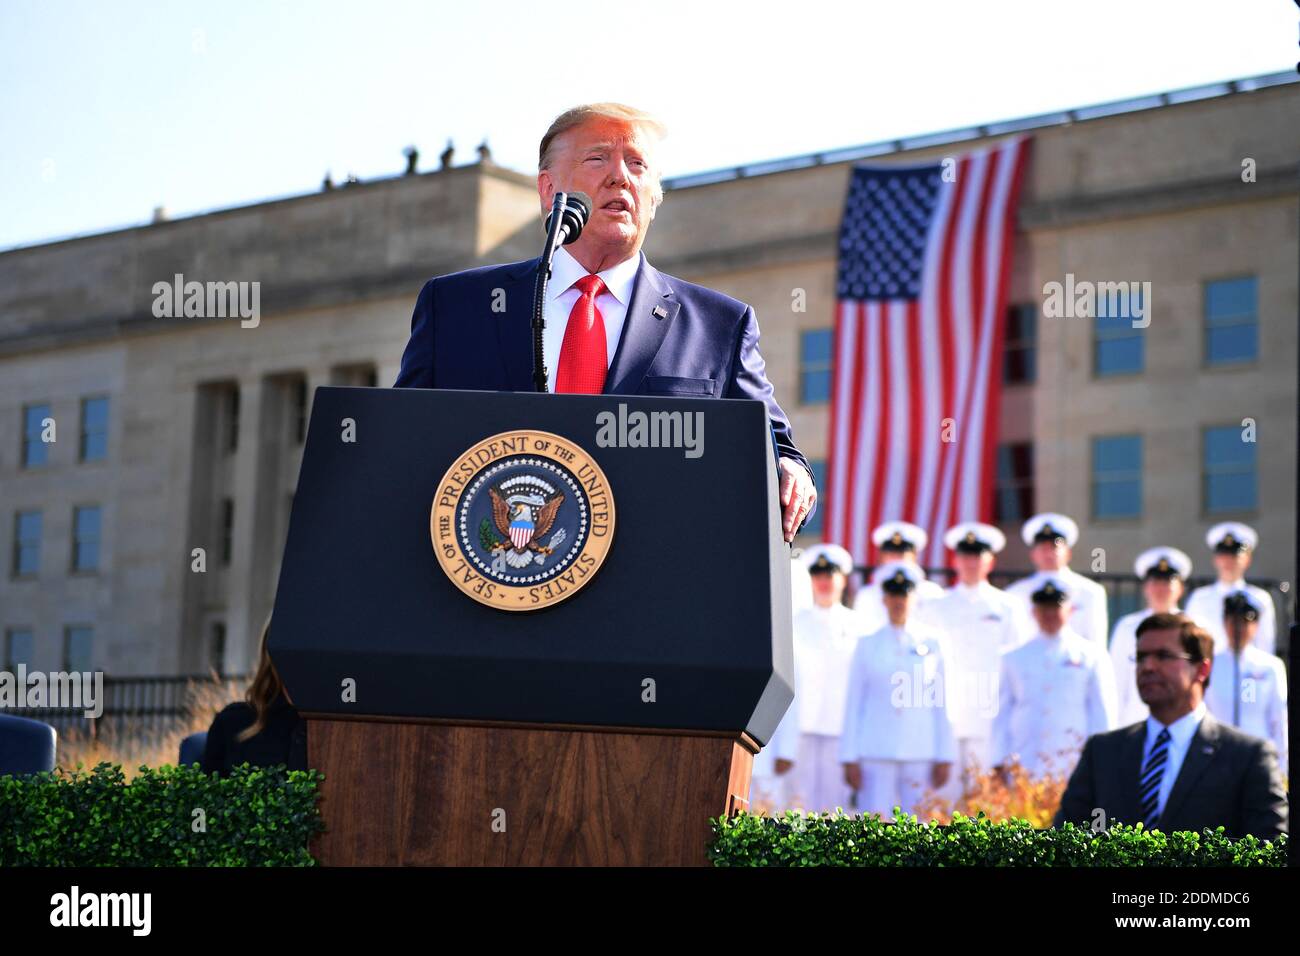 President Donald Trump makes a statement in front of the Pentagon during the 18th anniversary commemoration of the September 11 terrorist attacks, in Arlington, Virginia on Wednesday, September 11, 2019. Photo by Kevin Dietsch/Pool/ABACAPRESS.COM Stock Photo